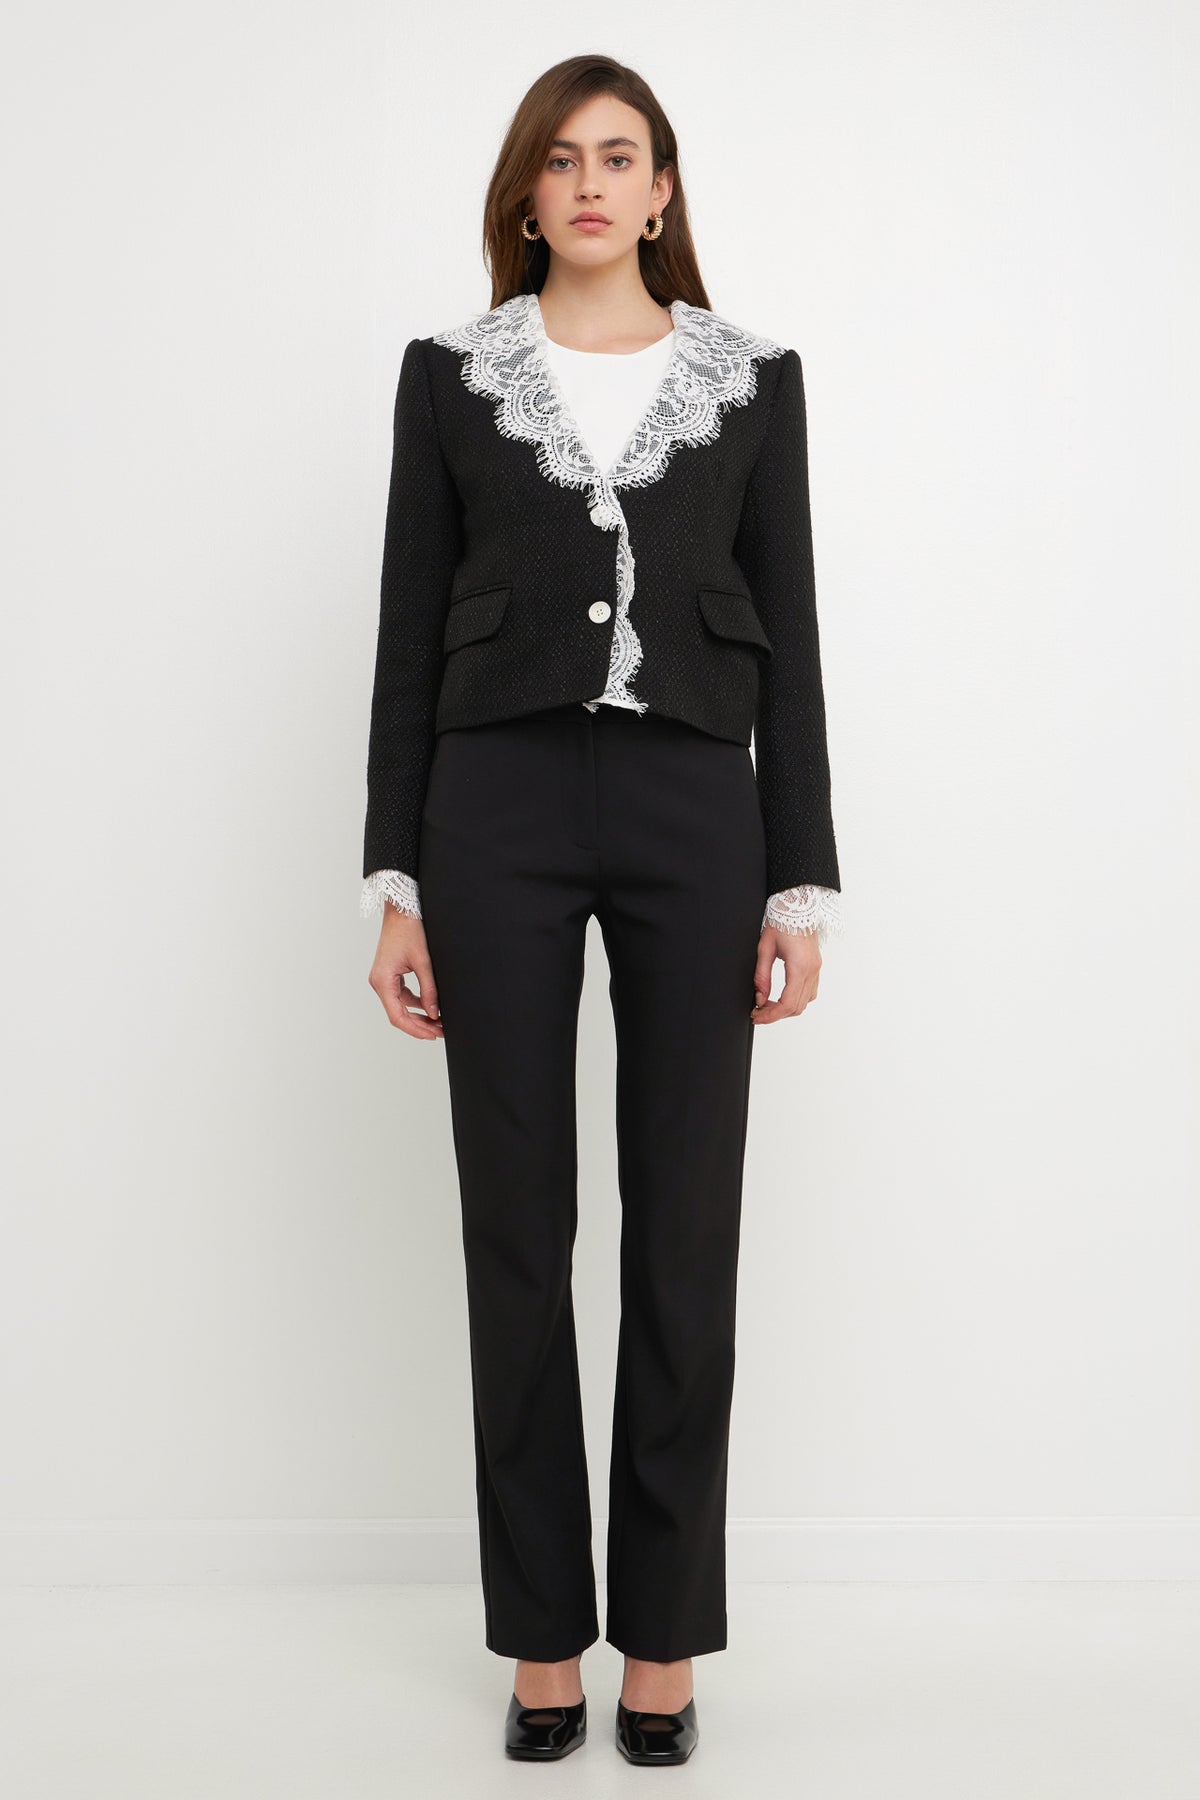 ENDLESS ROSE - Tweed Jacket With Lace Collar - JACKETS available at Objectrare